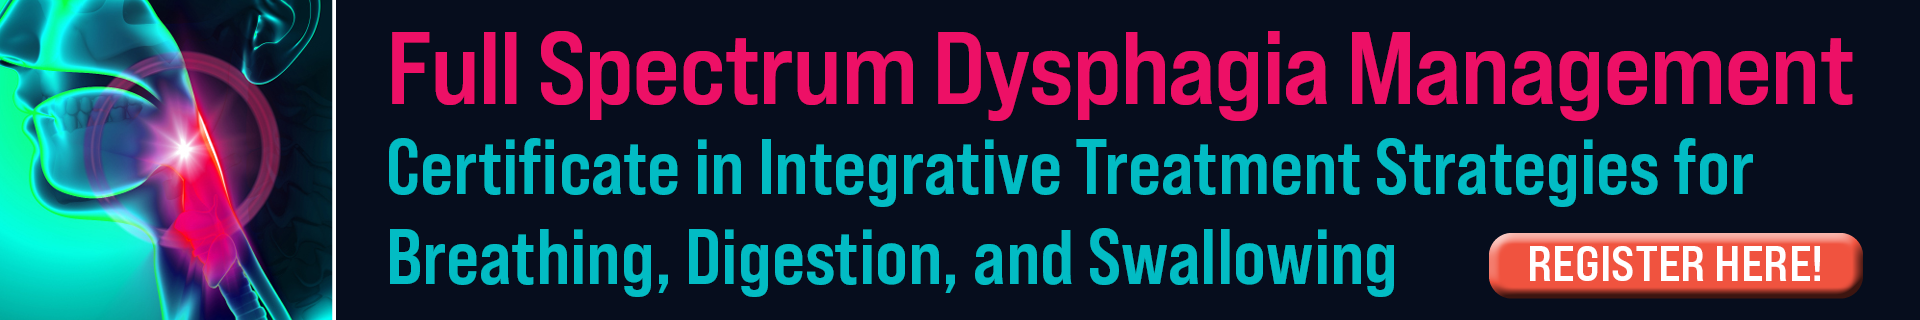 Full Spectrum Dysphagia Management: Certificate in Integrative Treatment Strategies for Breathing, Digestion, and Swallowing